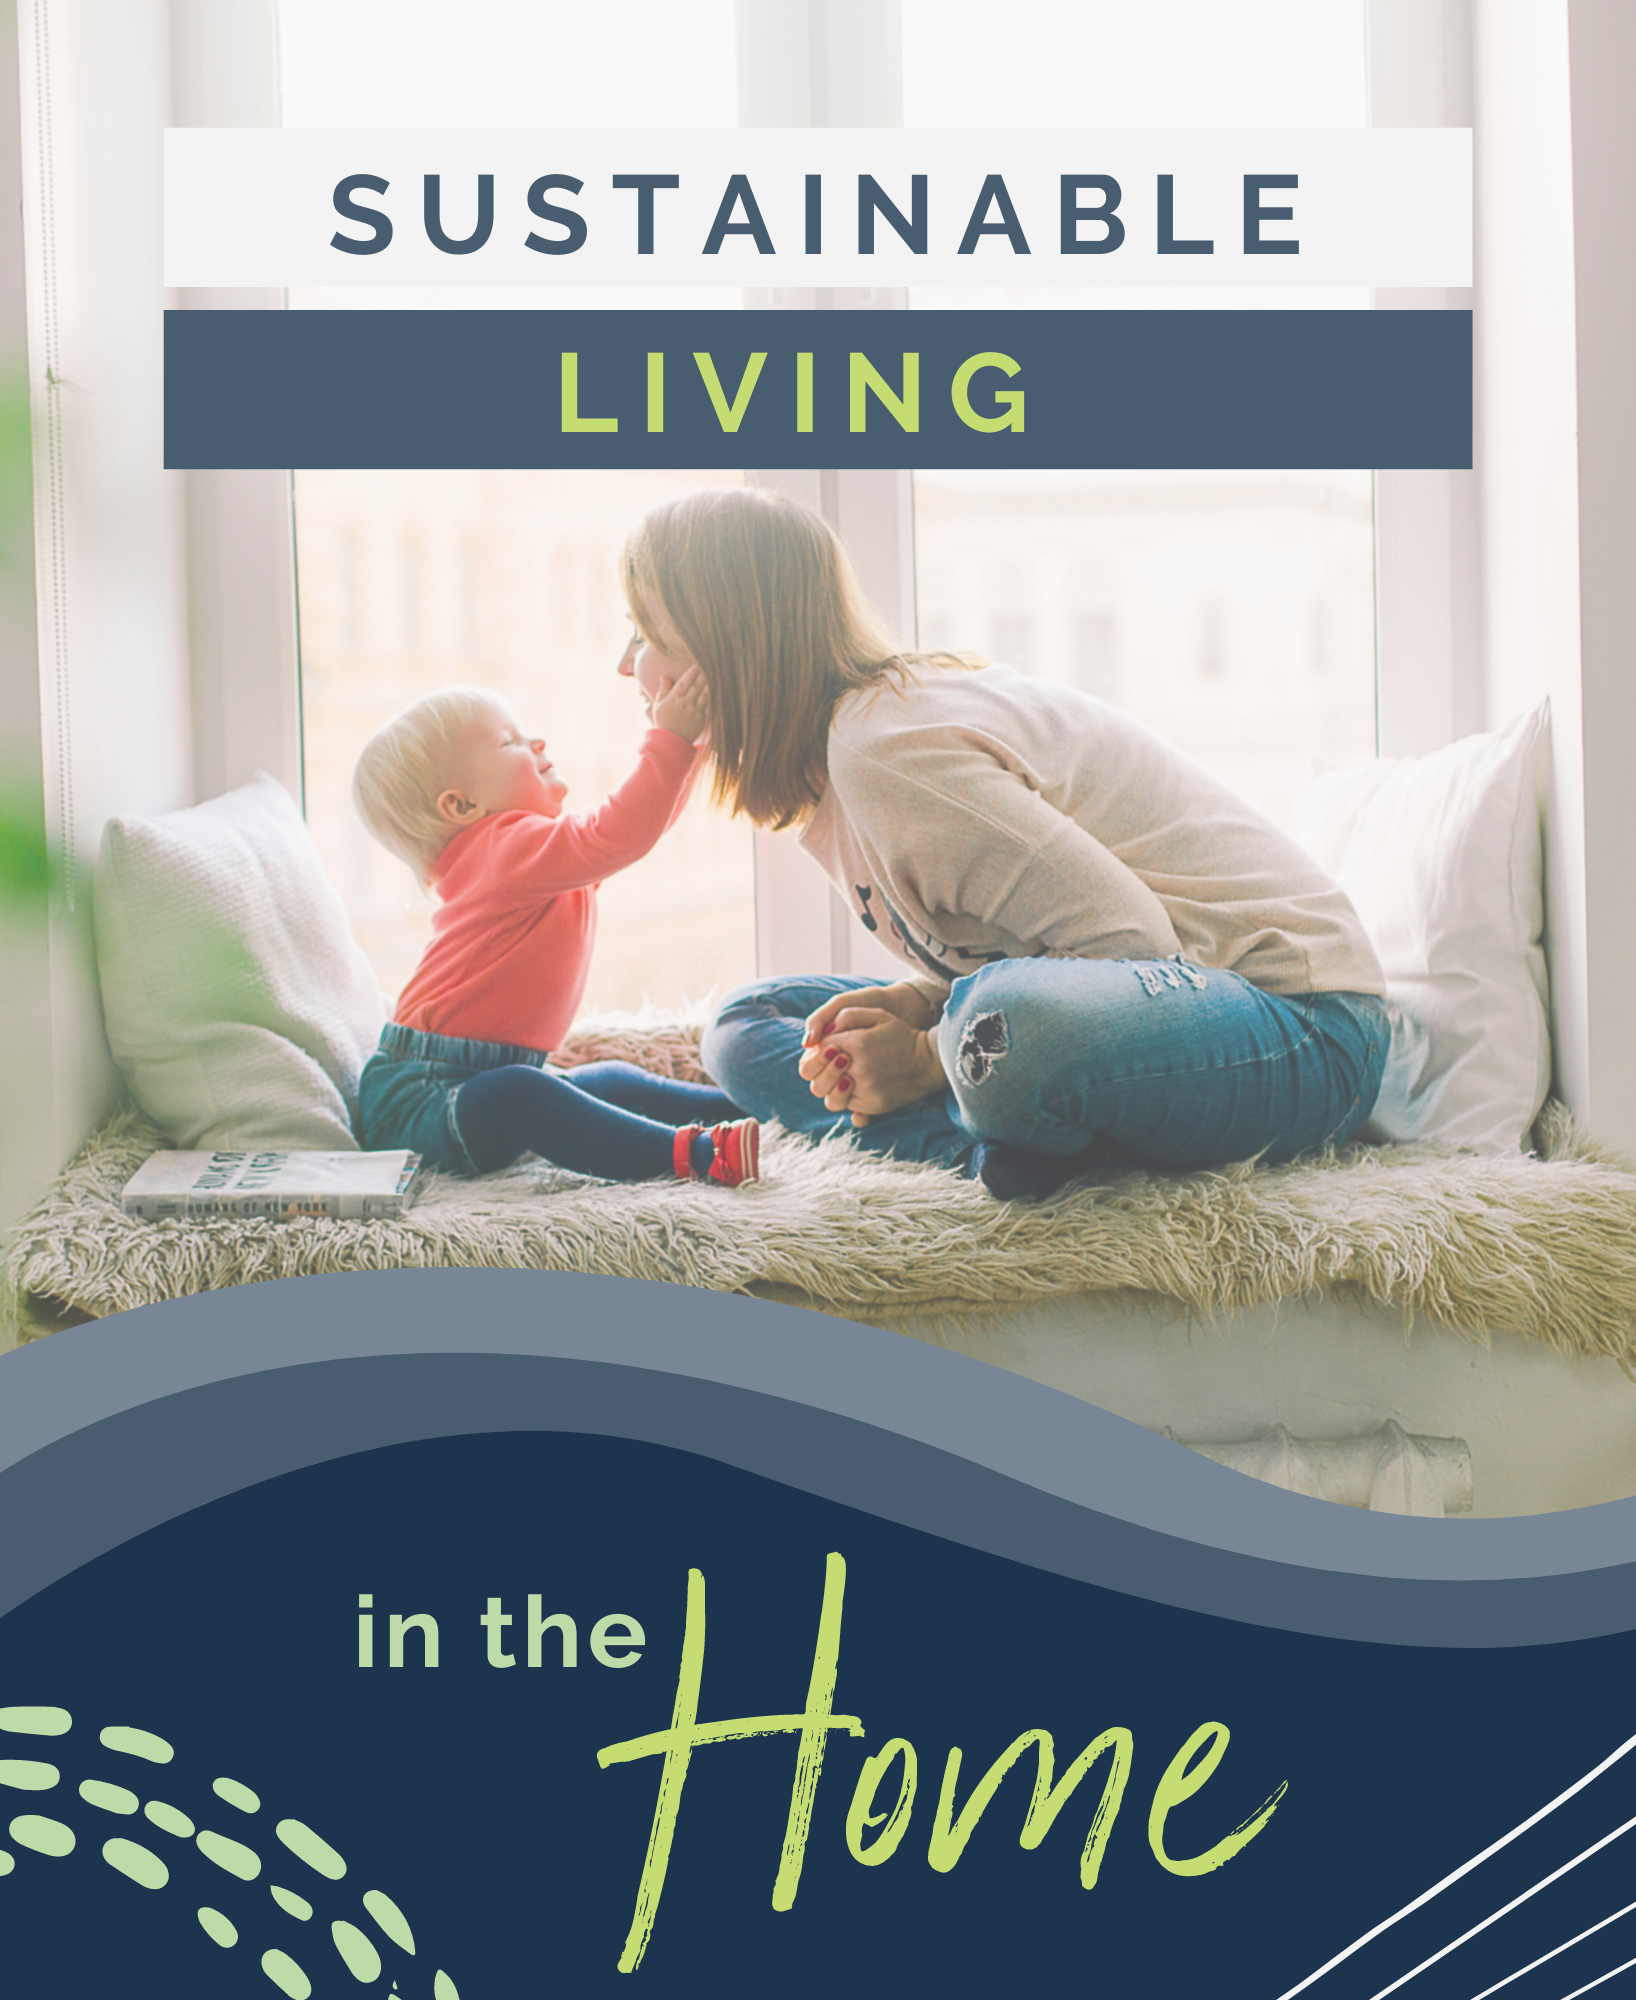 SustainableLiving-NSP